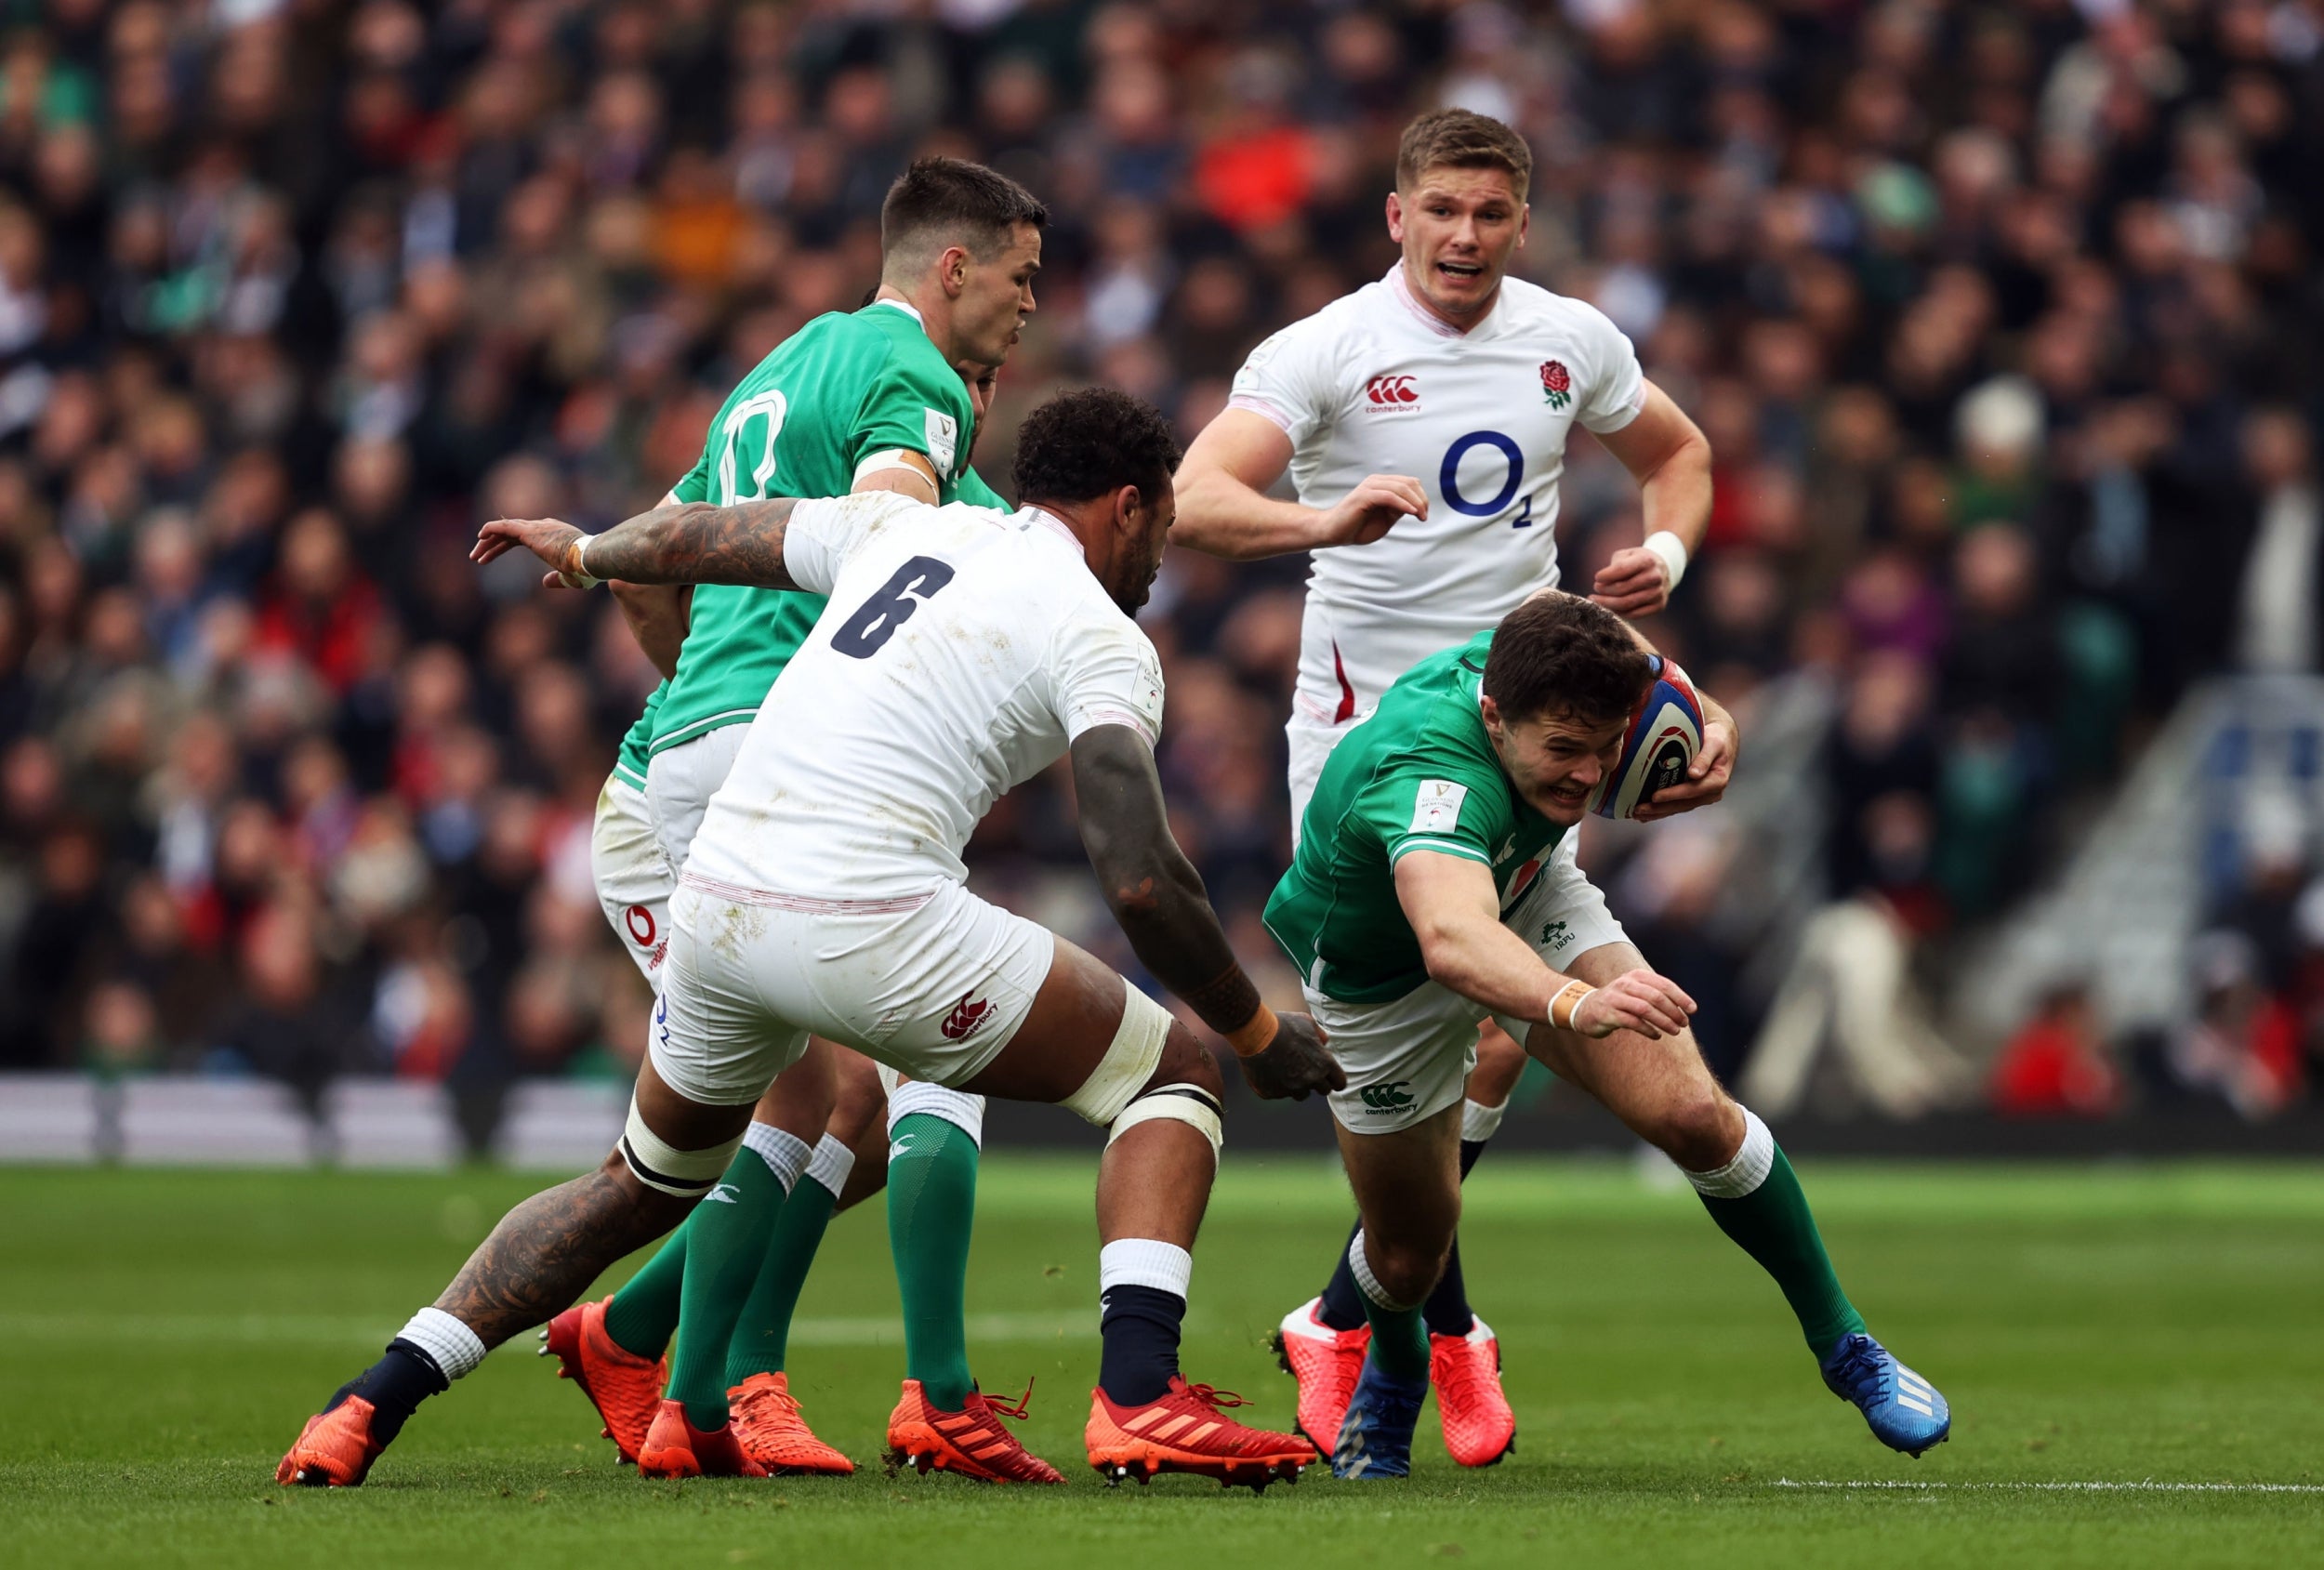 Ireland’s Jacob Stockdale (right) gets away from England’s Courtney Lawes during the game at Twickenham